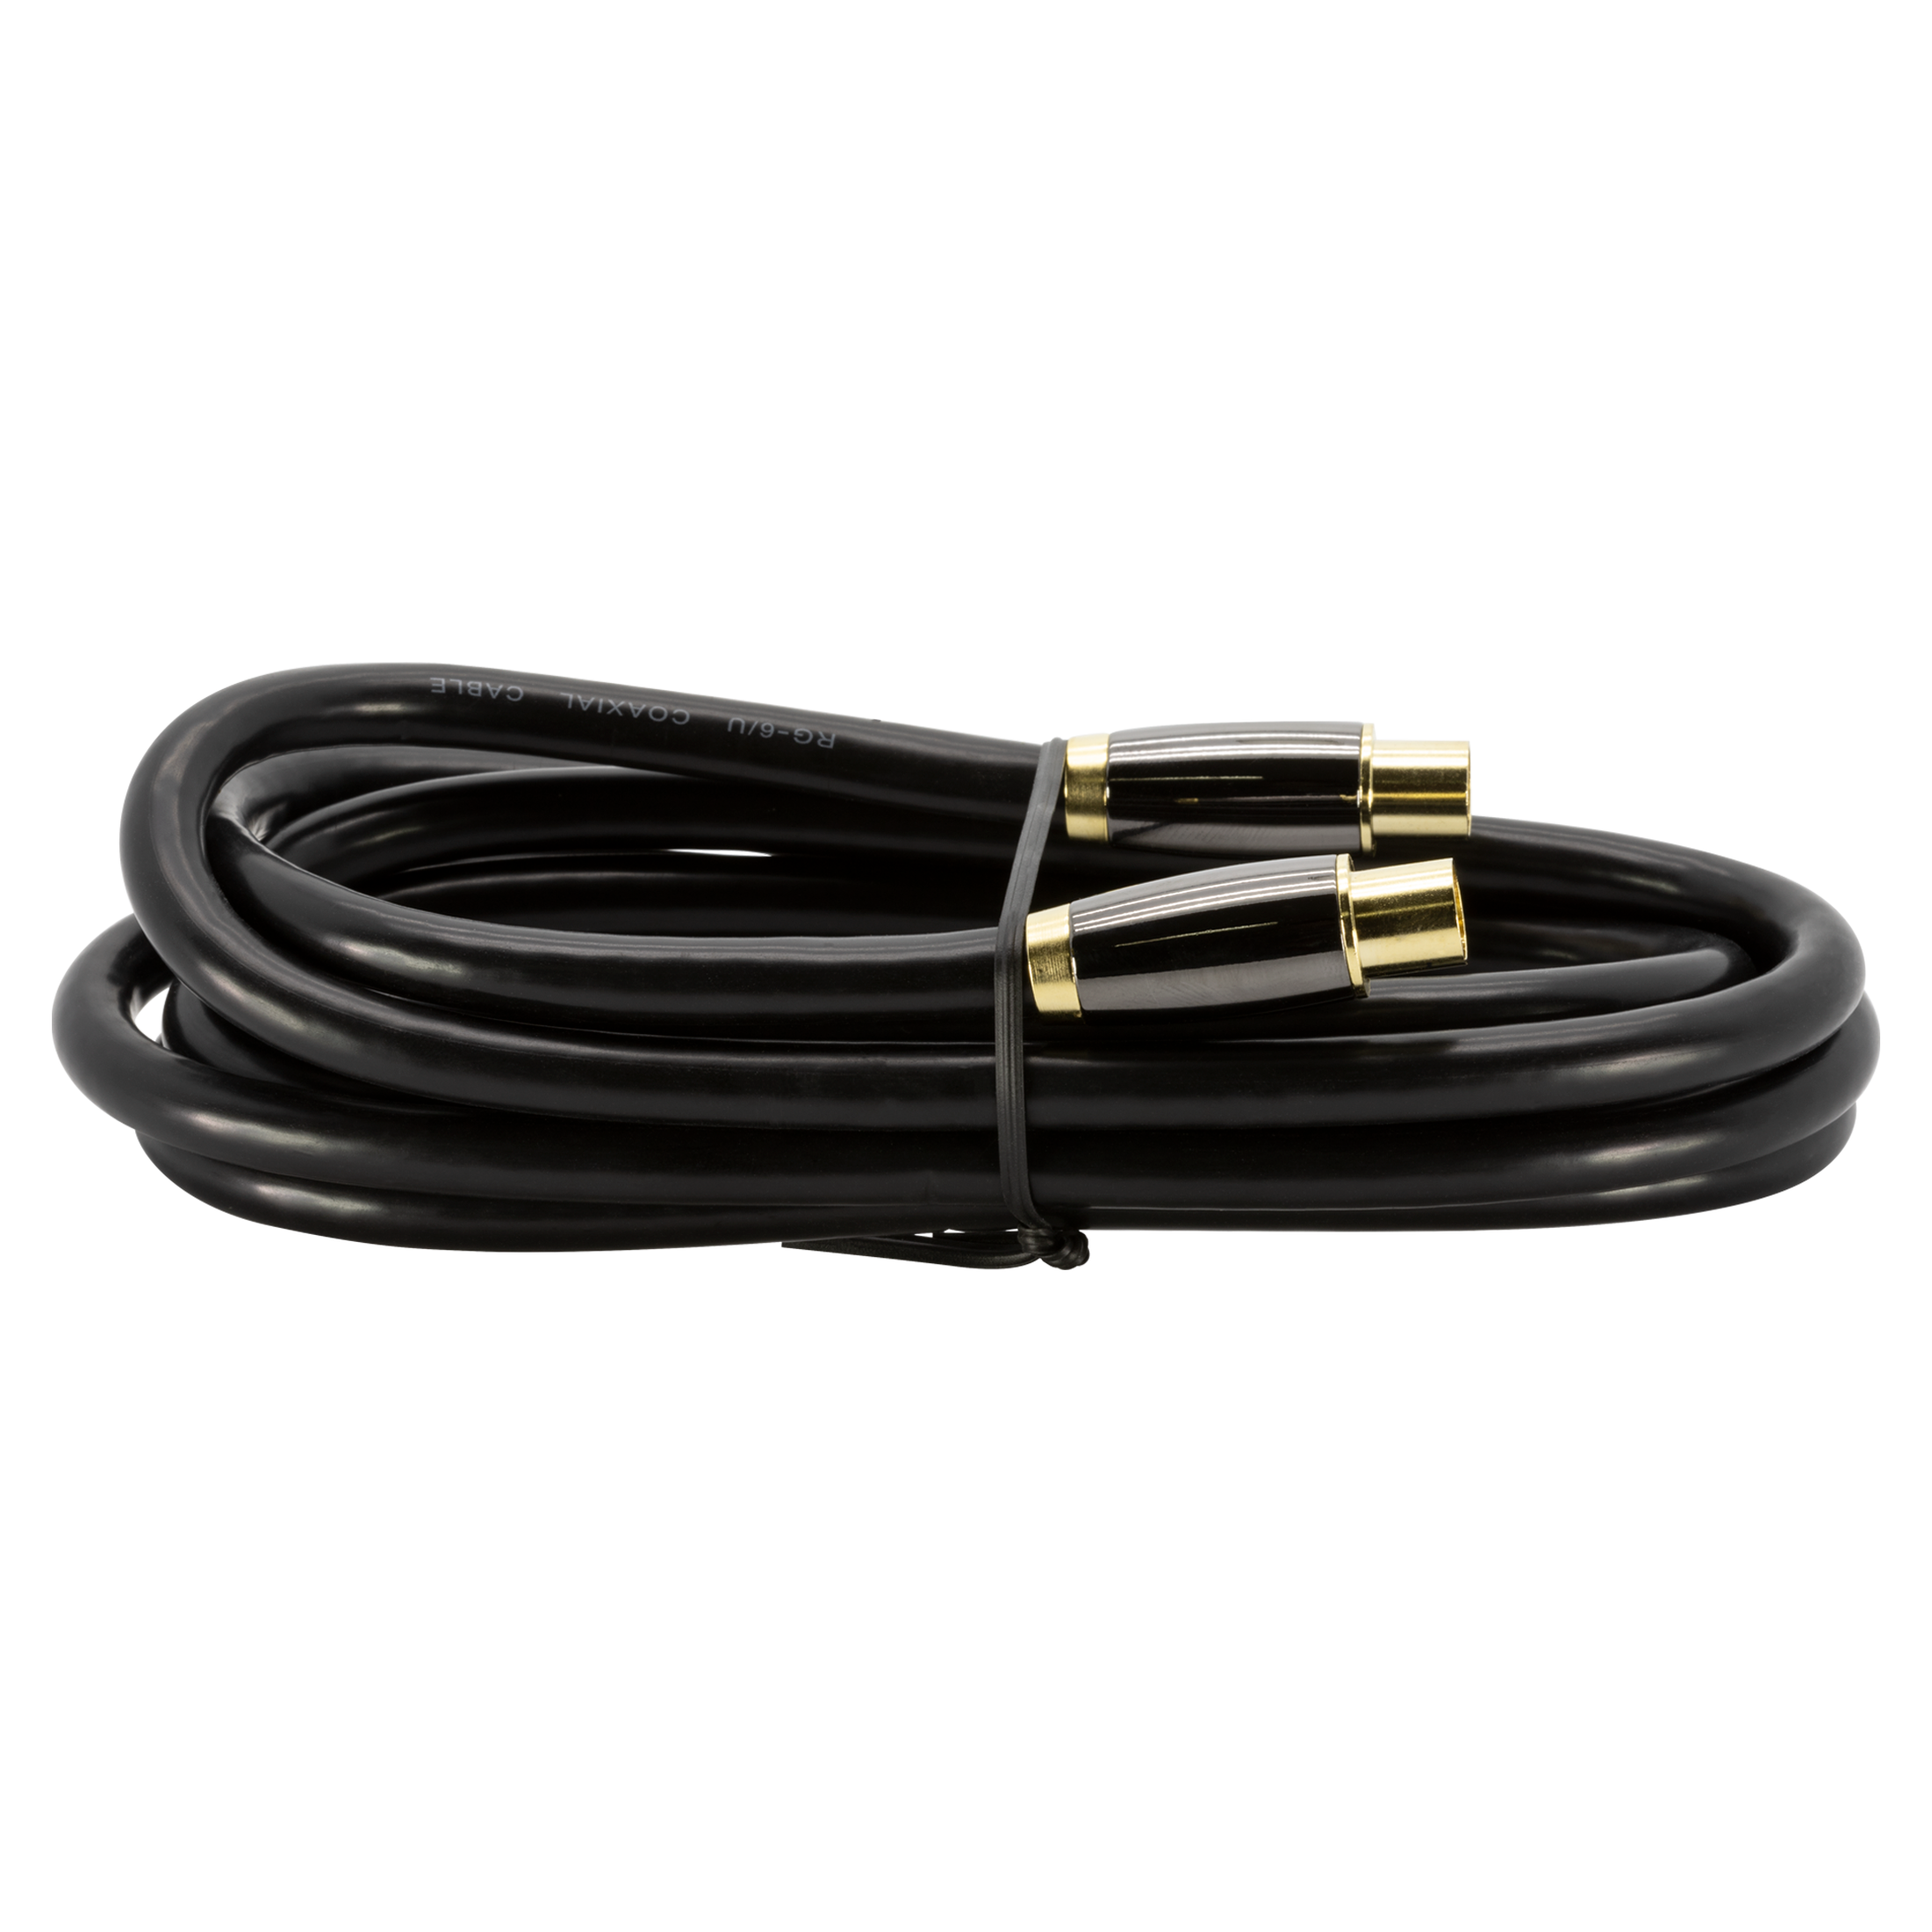 Digital TV Antenna Cable